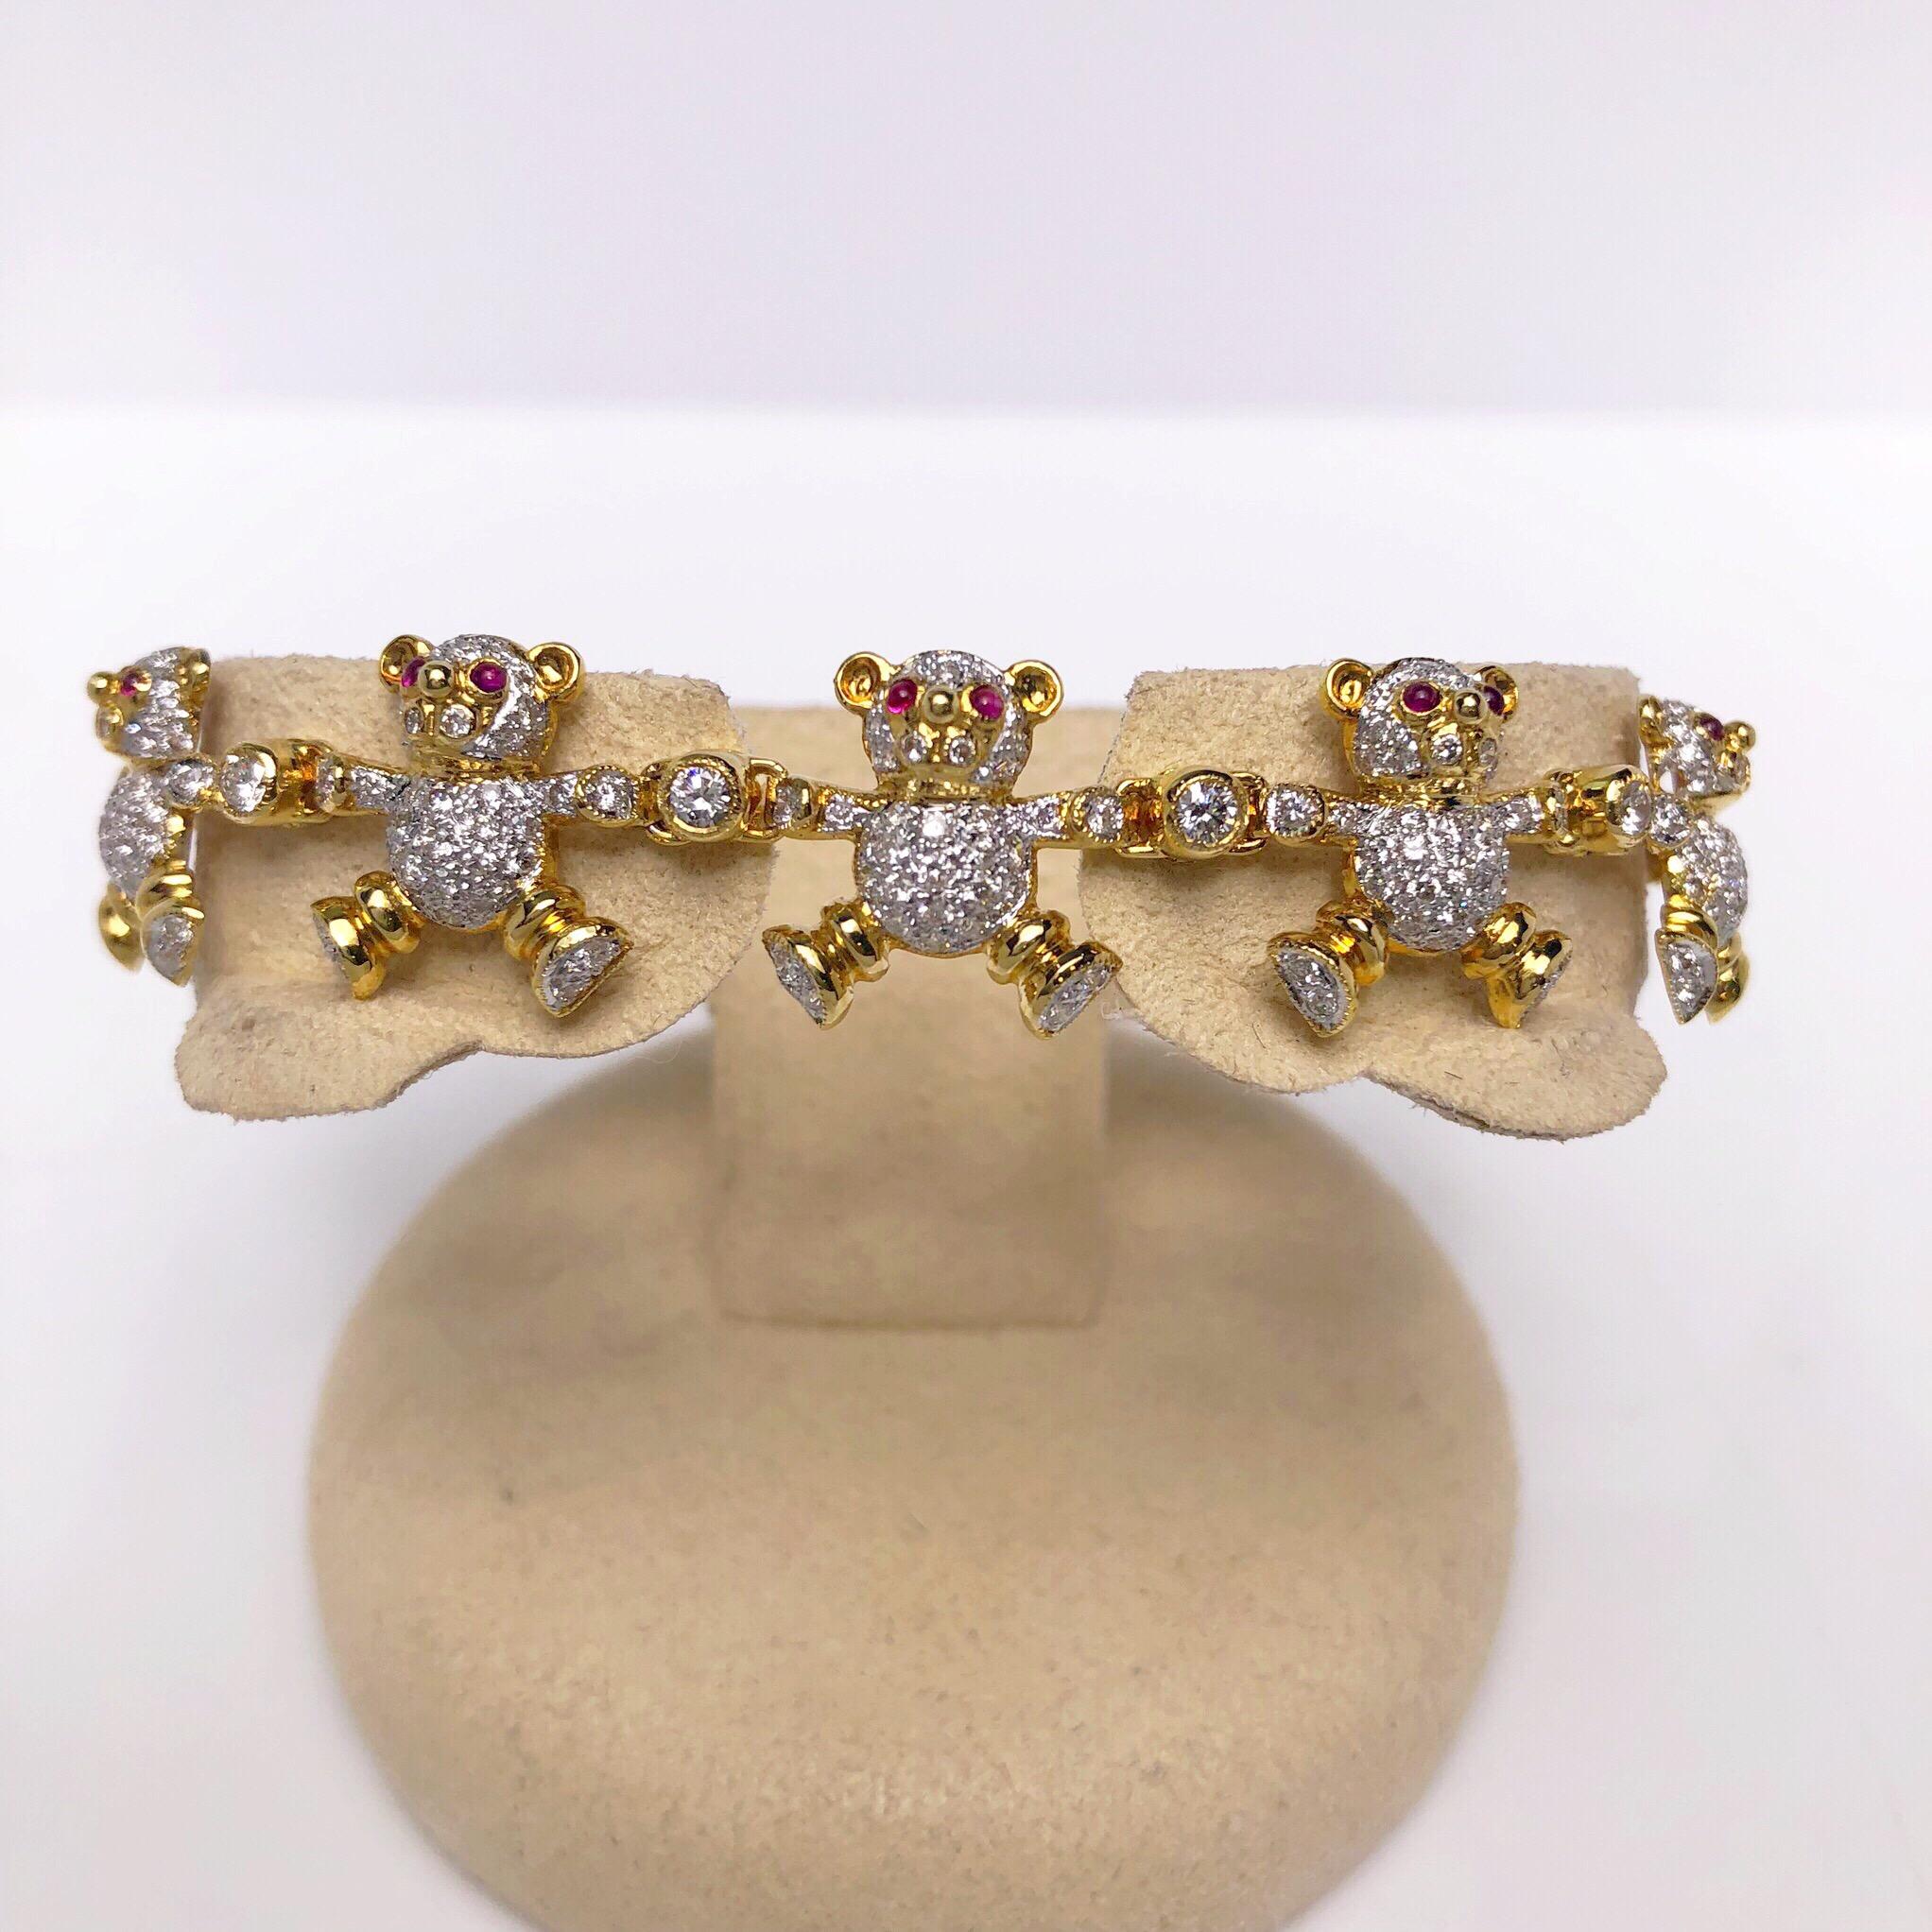 Playful yet elegant best describes this 18KT gold and diamond teddy bear bracelet. Each of the 10 bears are pave set with round white brilliant diamonds and cabachon ruby eyes. They are joined together by round brilliant solitare bezel set